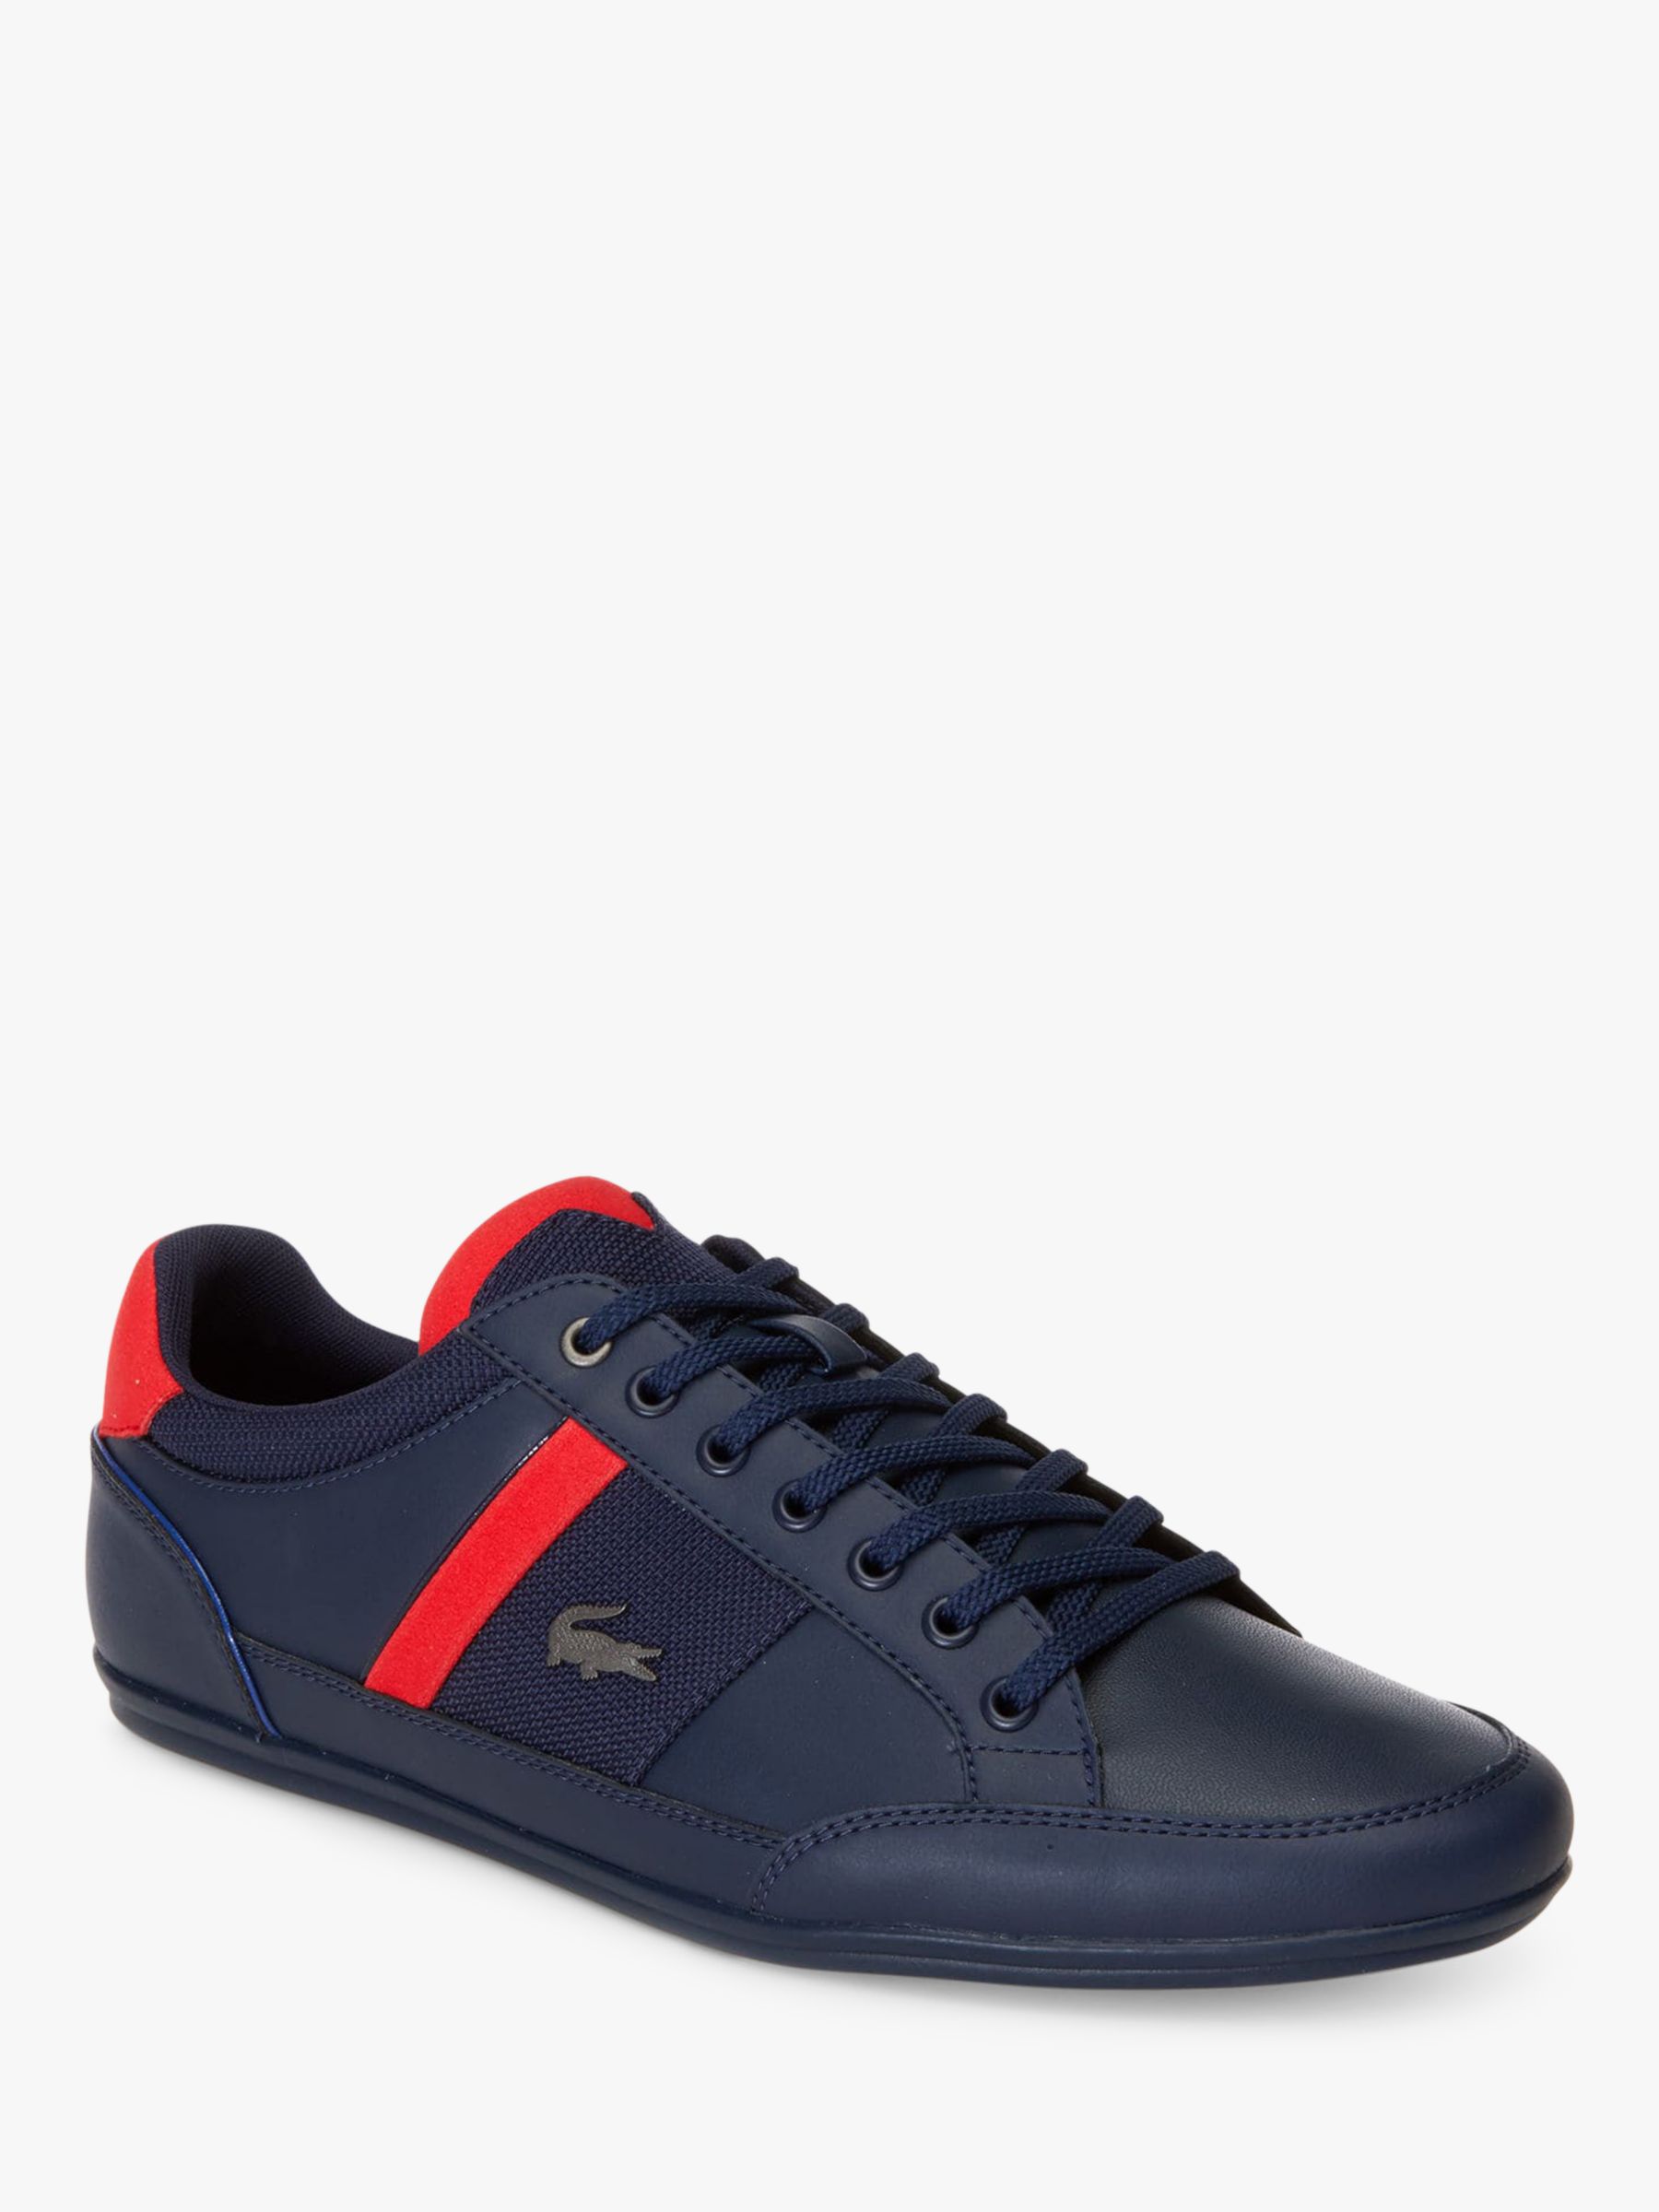 Lacoste Chaymon Trainers, Navy/Red